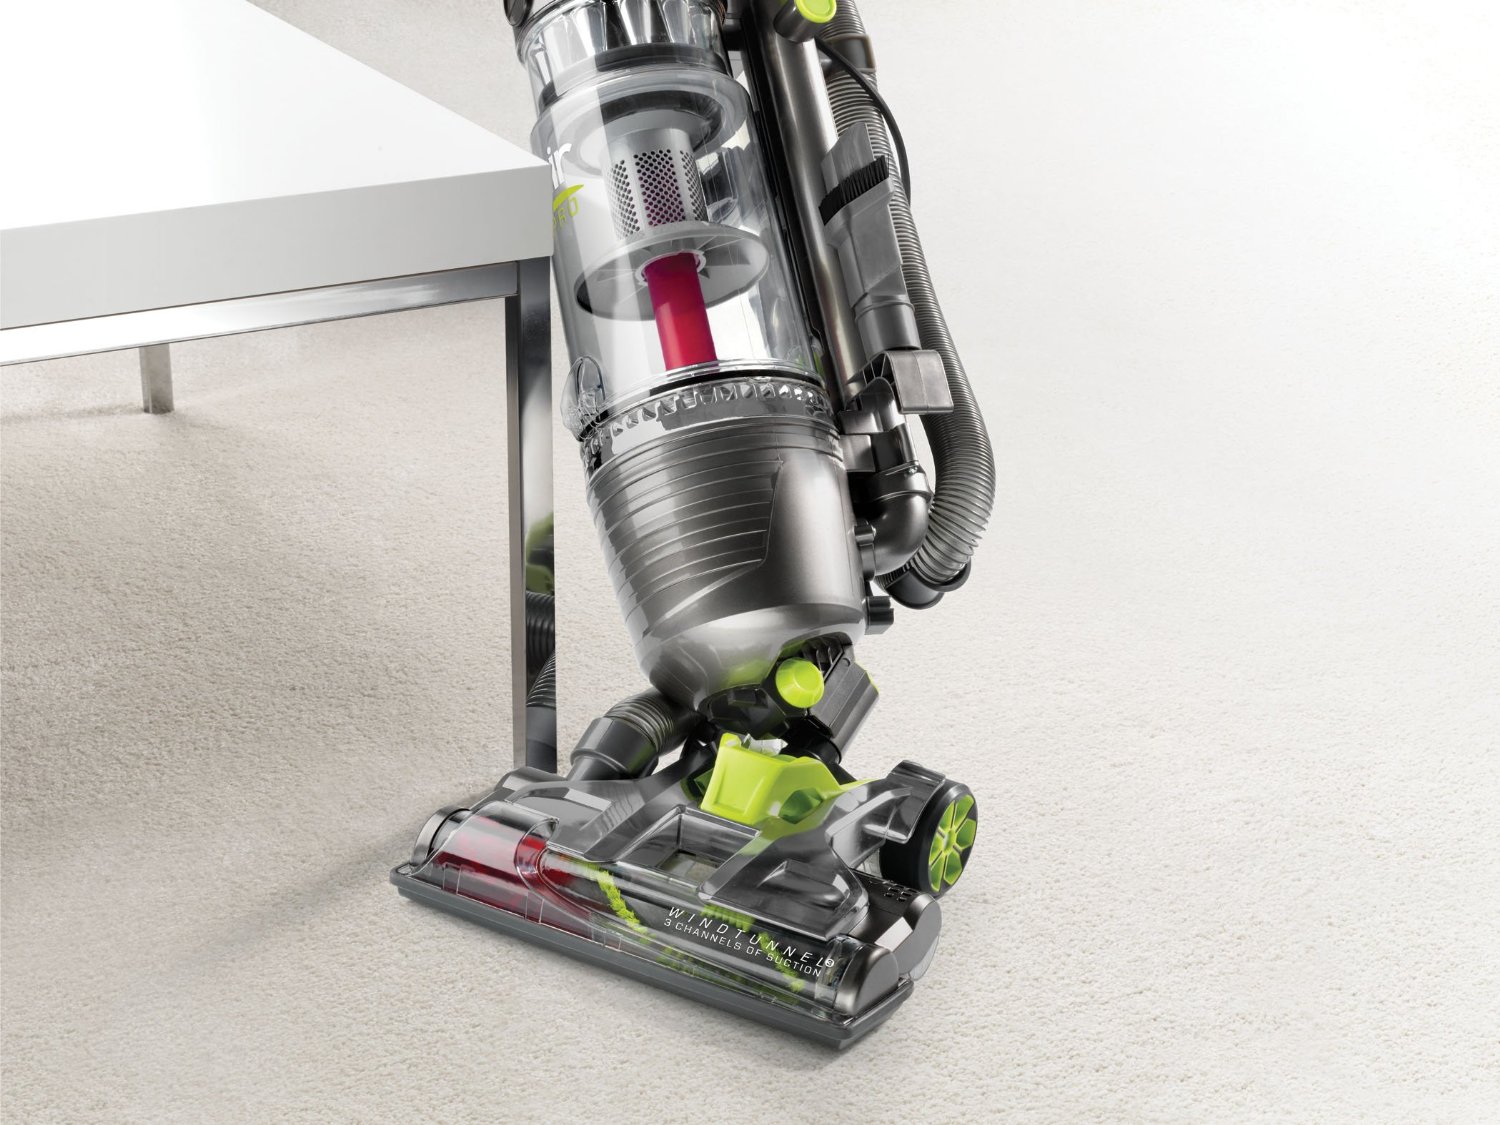 https://9to5toys.com/wp-content/uploads/sites/5/2015/03/hoover-uh72450-air-pro-bagless-upright-vacuum-sale-01.jpg